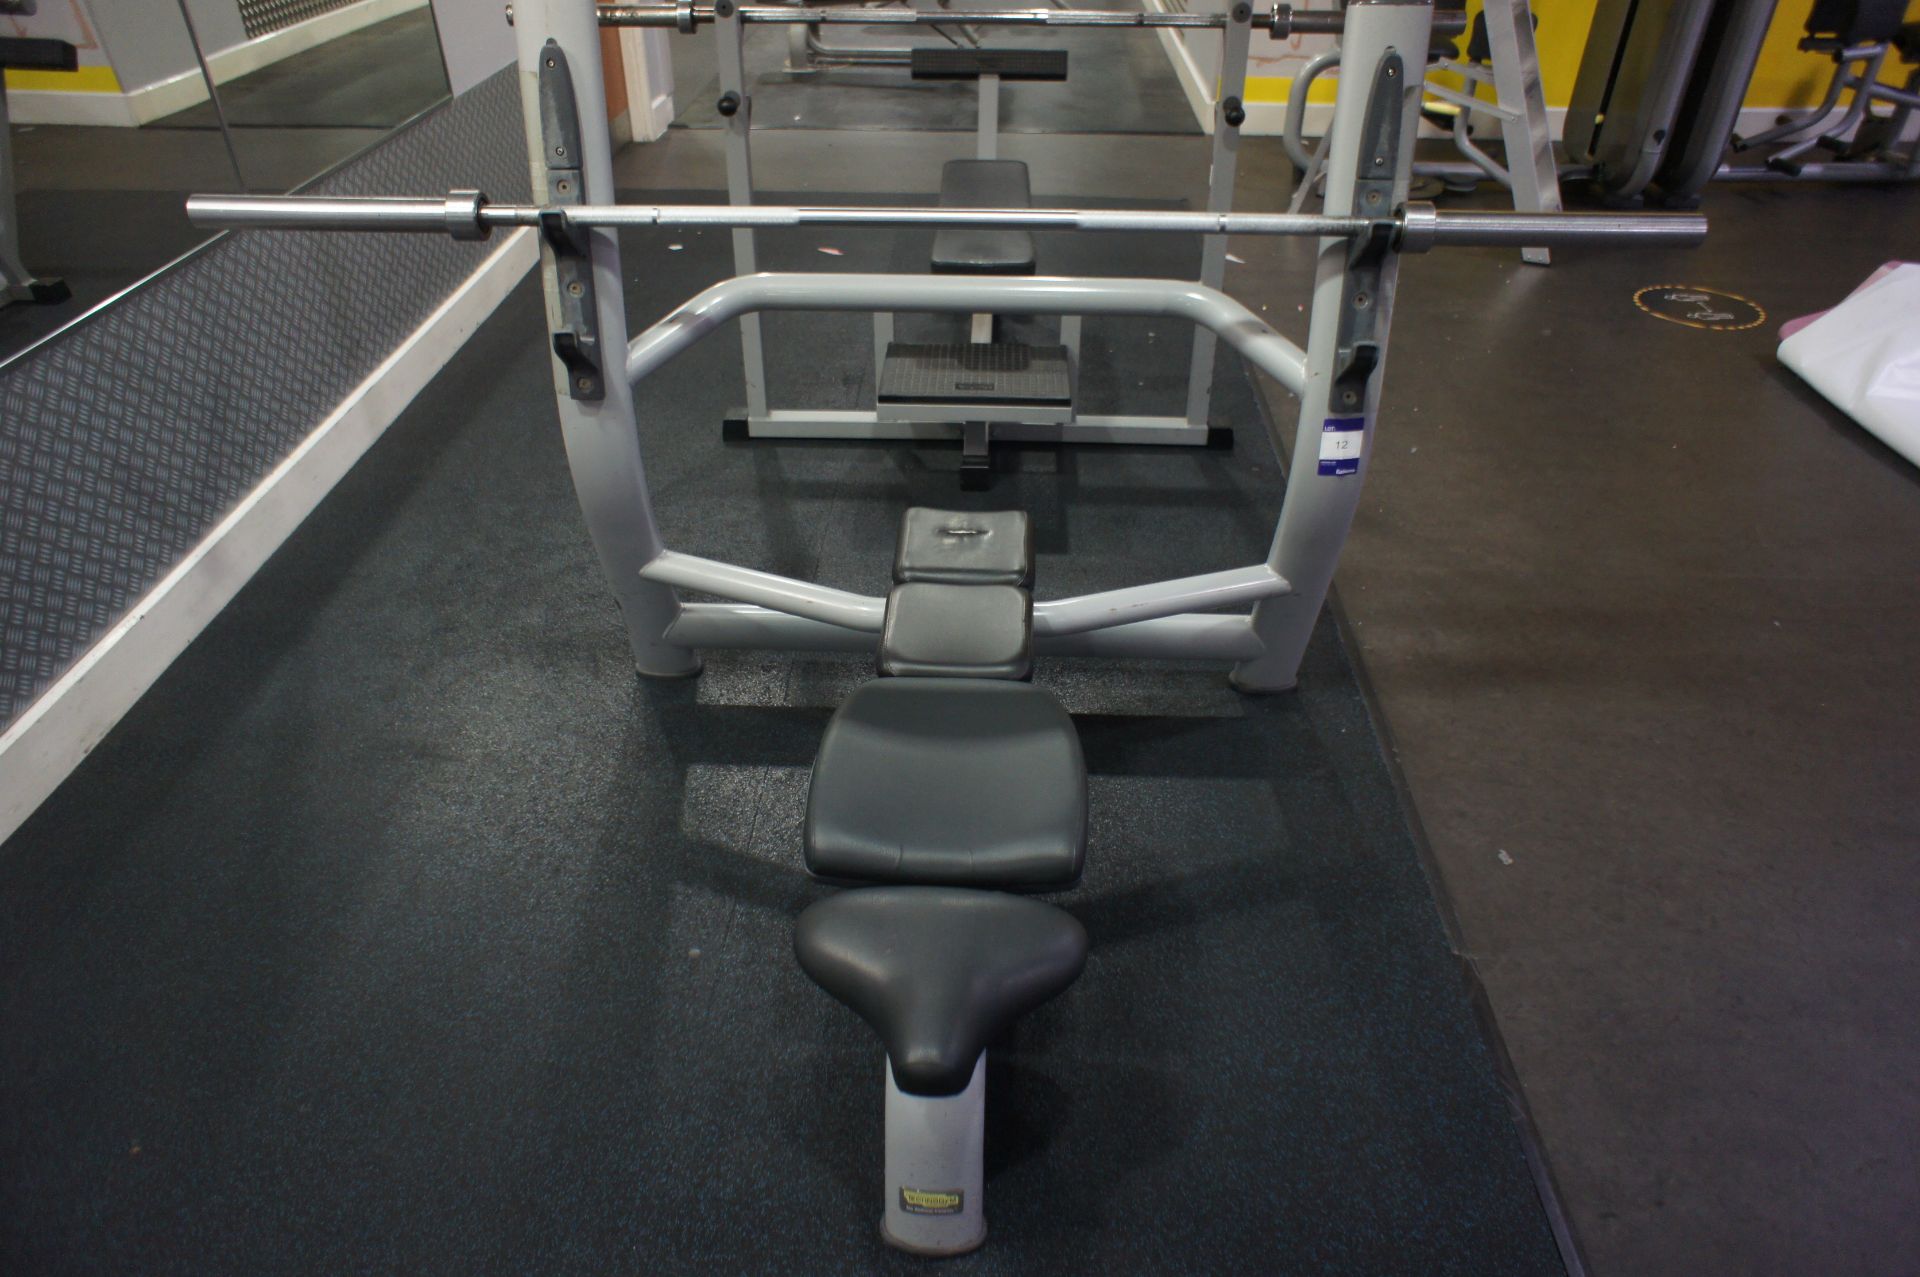 Technogym Weights Bench with Bar - Image 4 of 4